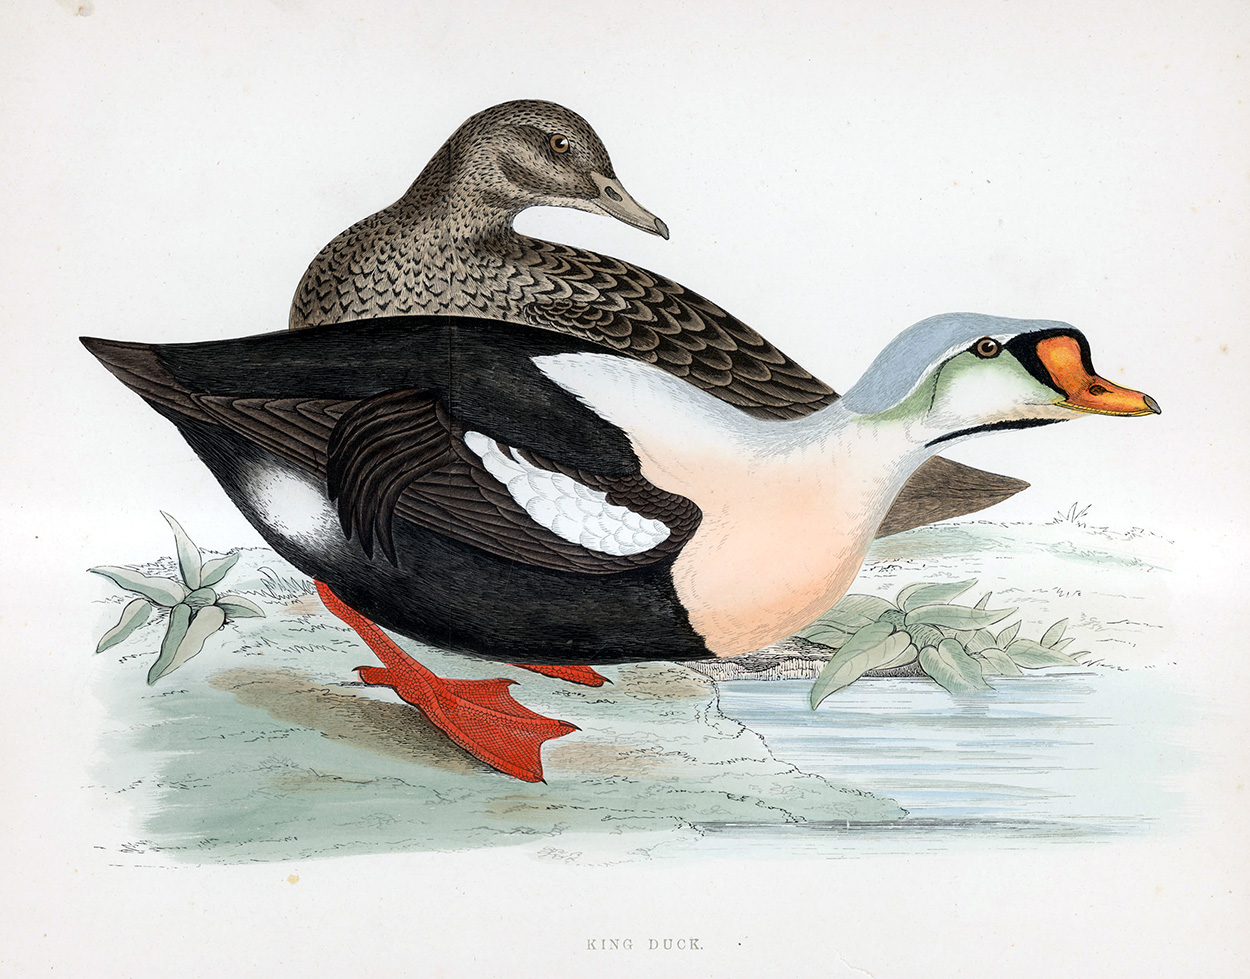 King Duck - hand coloured lithograph 1891 (Print) art by Beverley R Morris at The Illustration Art Gallery